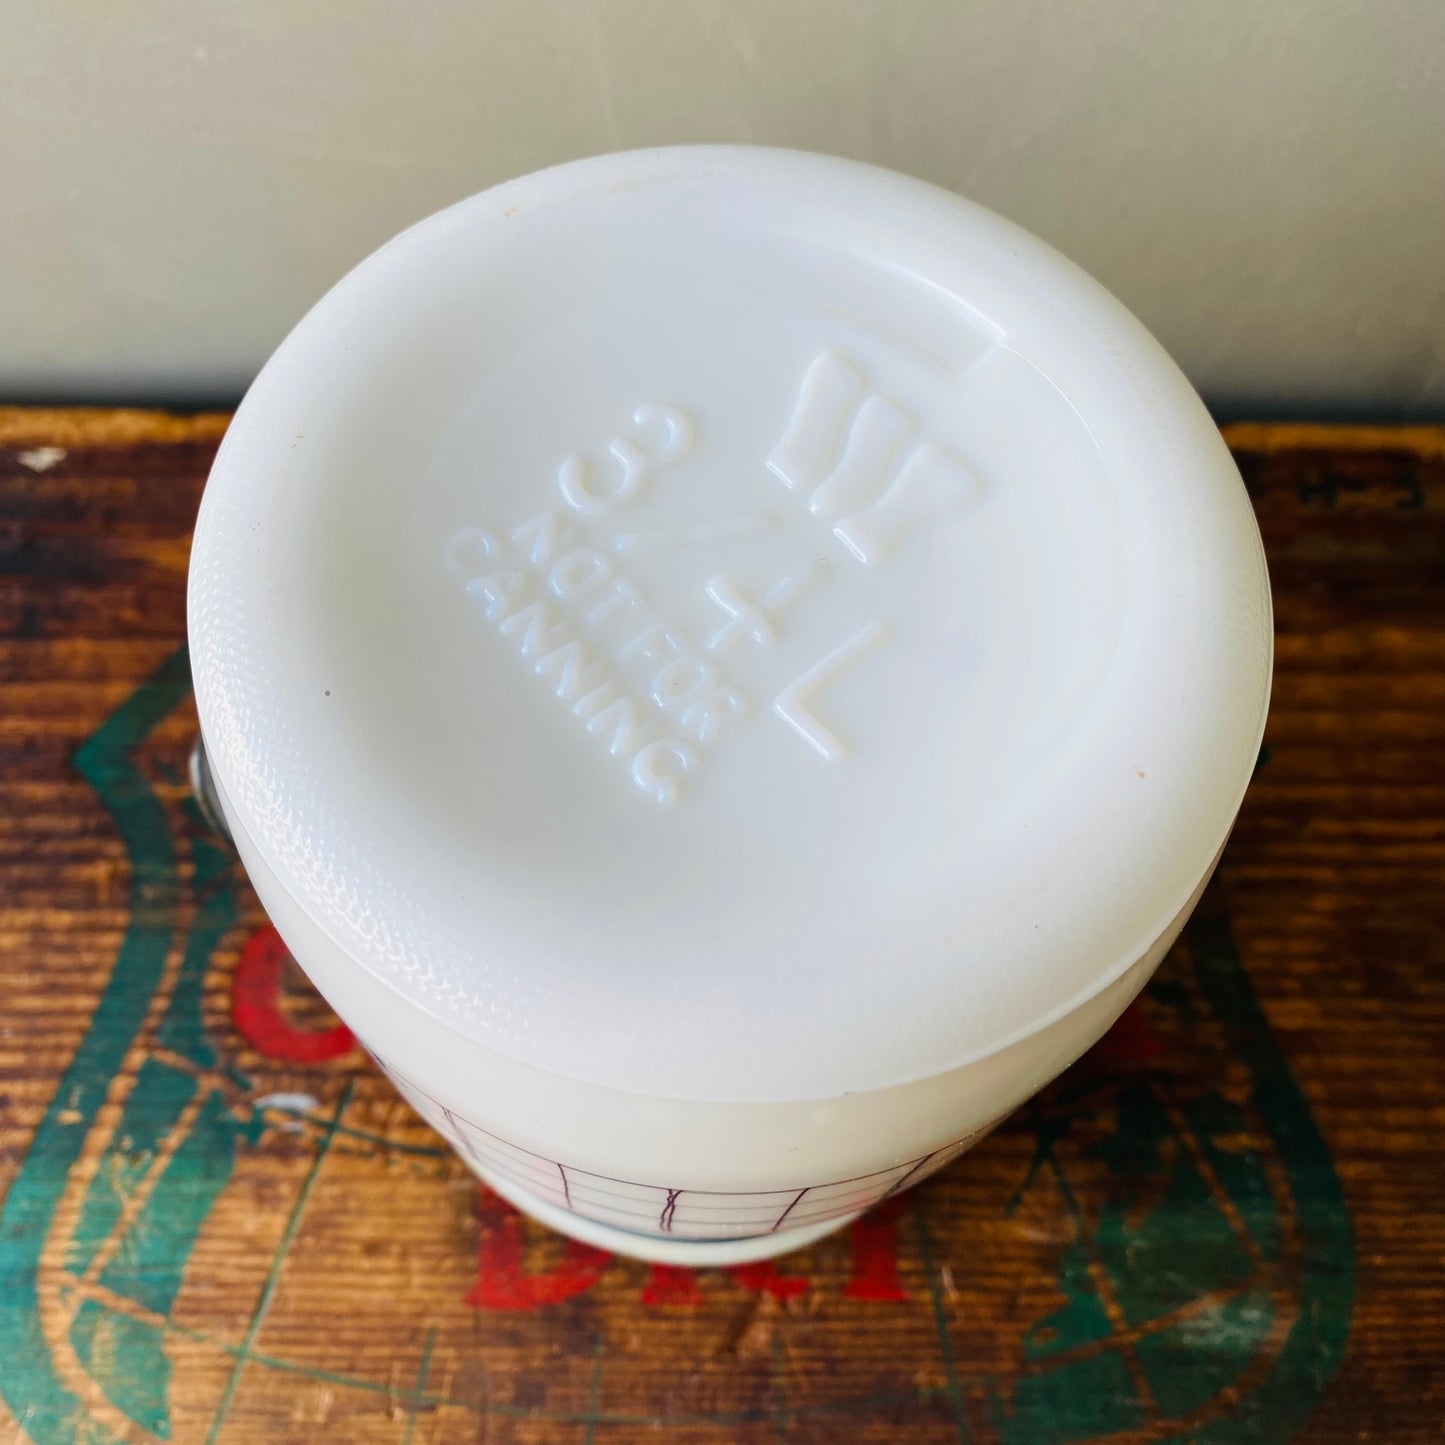 【1970s USA vintage】milk glass canister